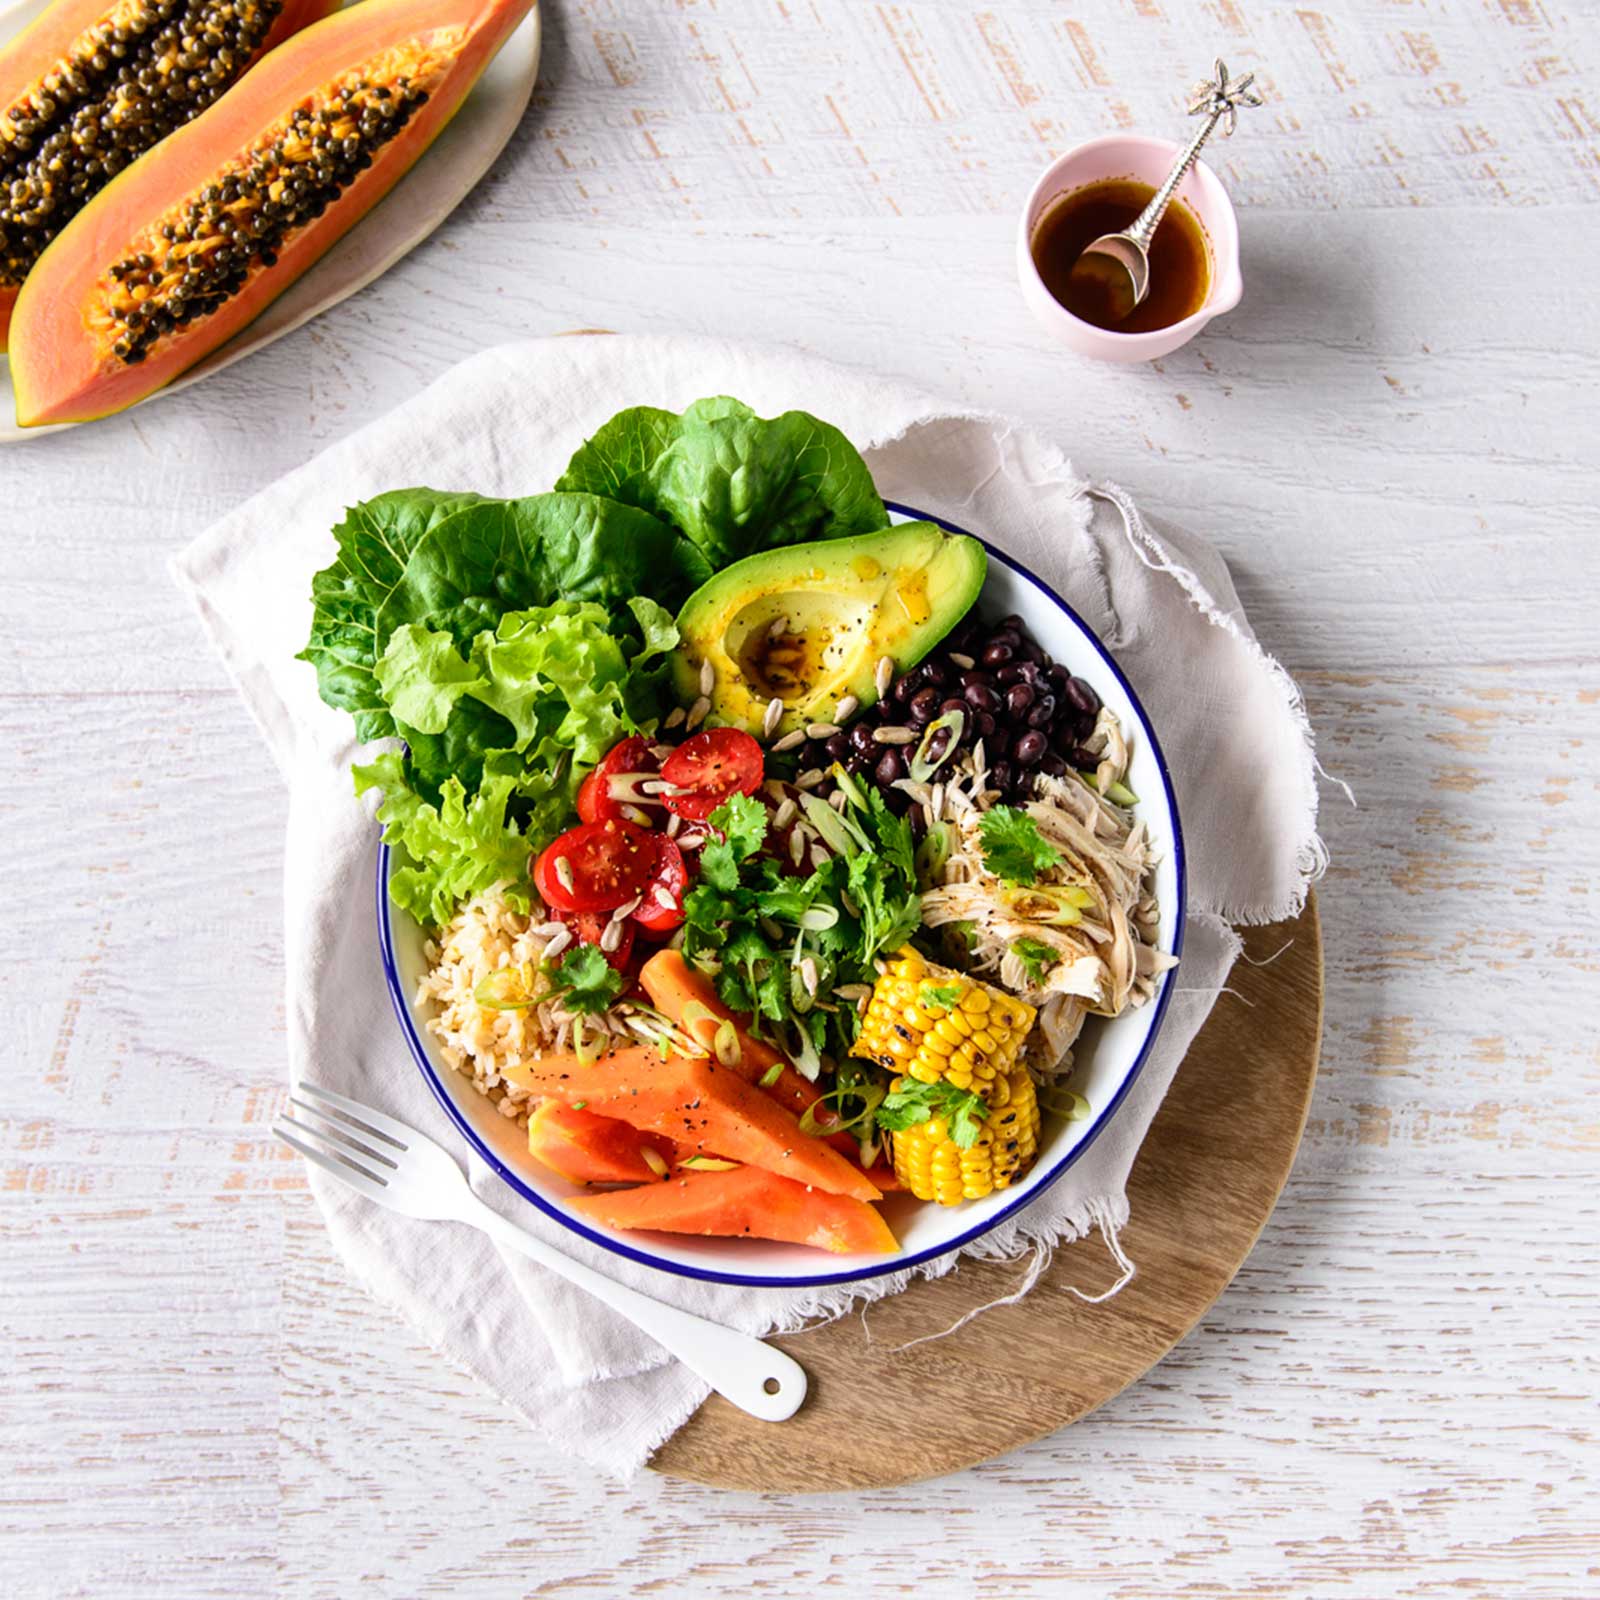 A white bowl with blue edge is shot over head. It rests on a round wooden board. A Mexican papaya buddha bowl is in the white bowl. A small dish with dressing rests to the side.